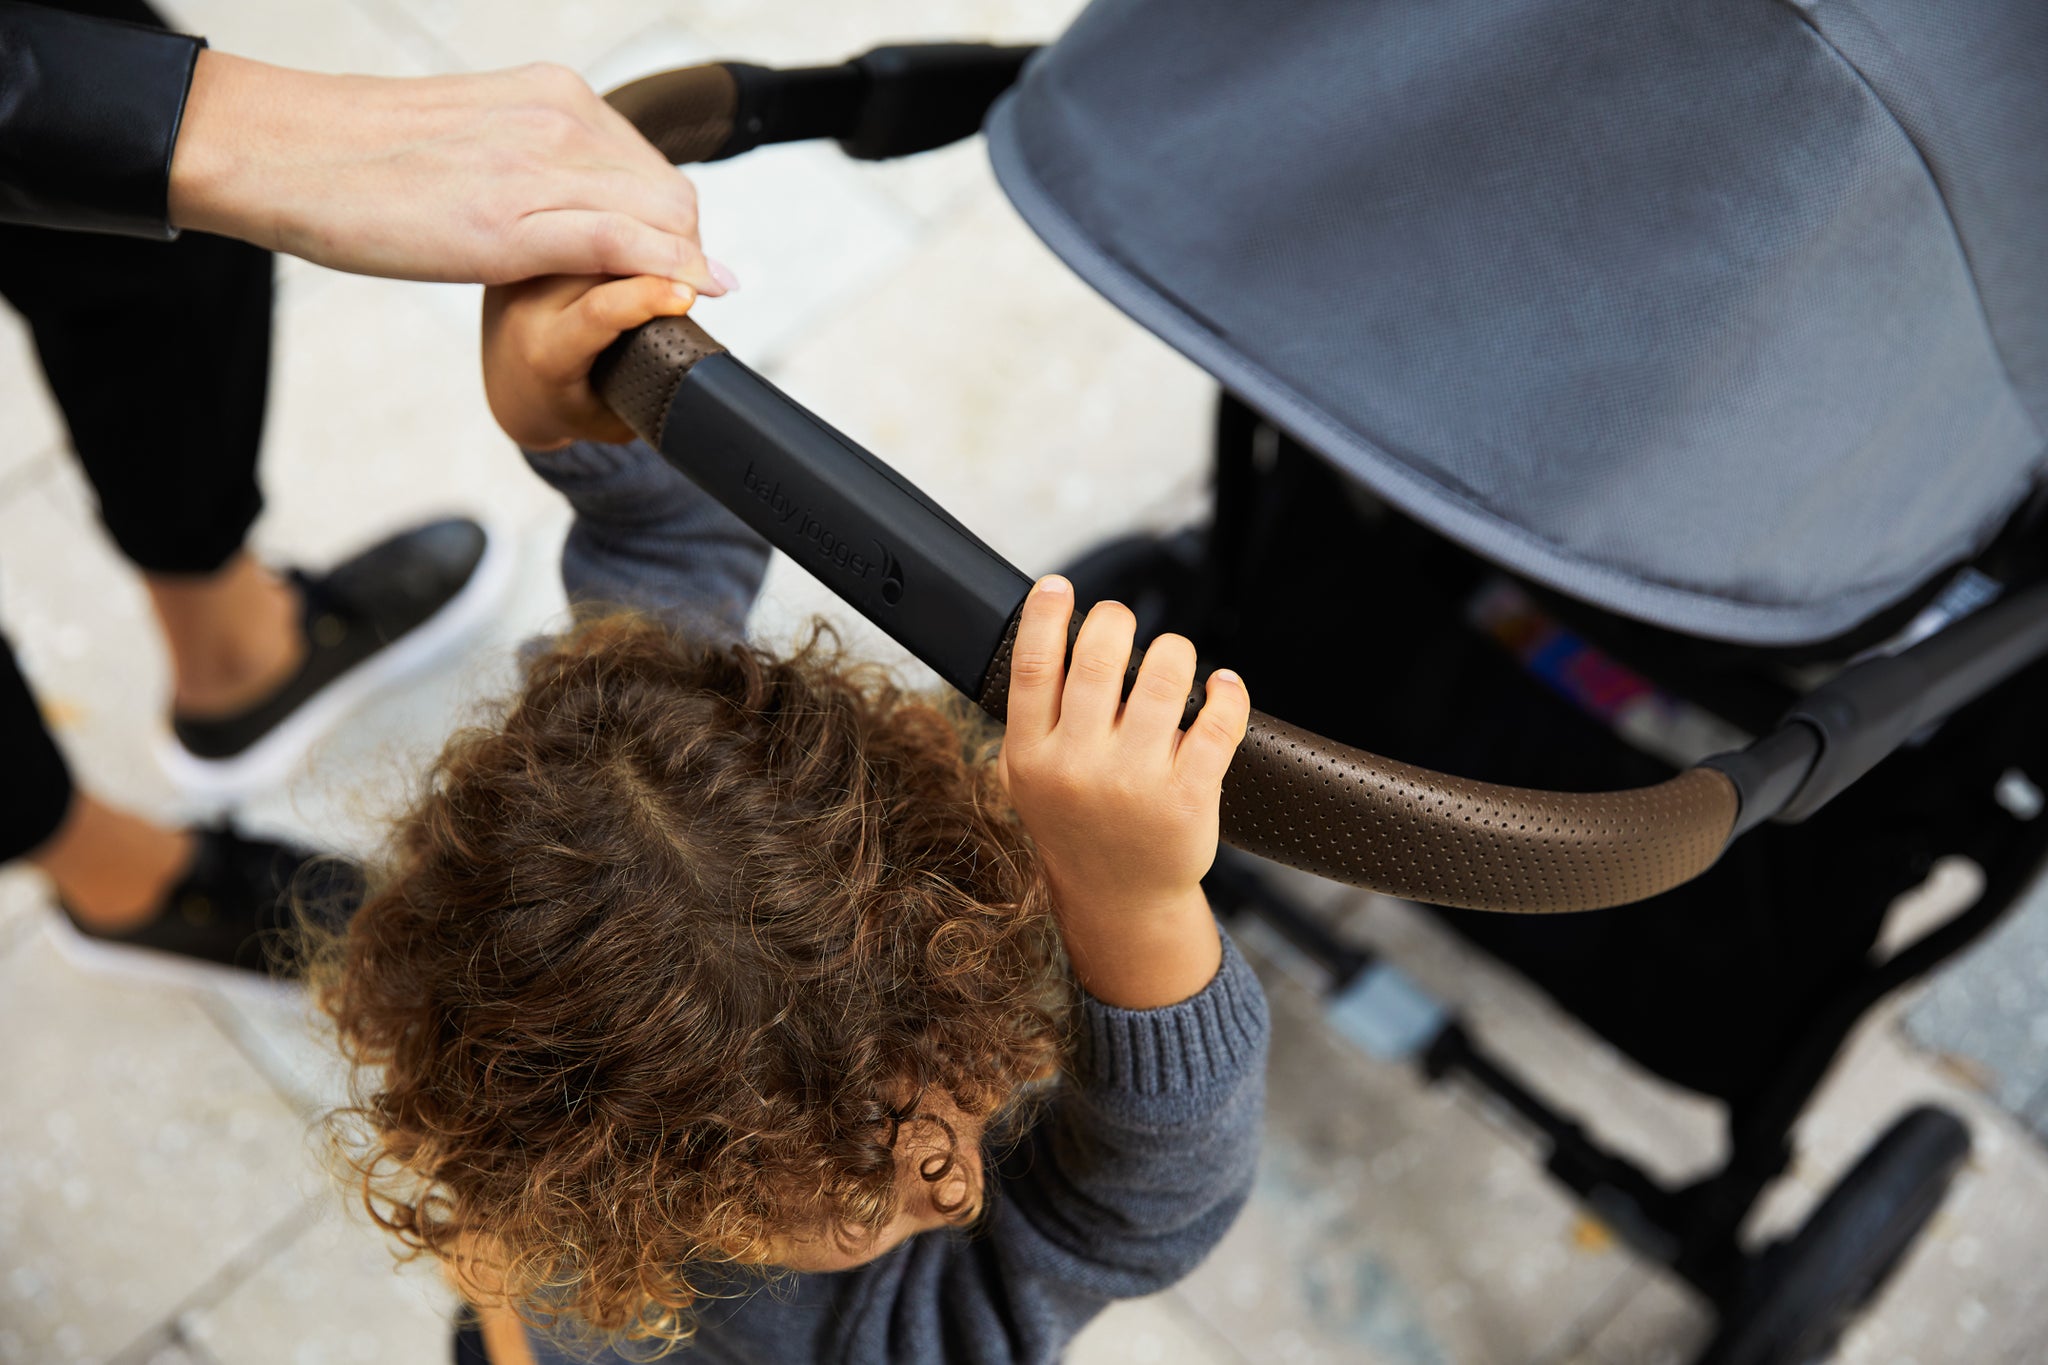 Keep your infant safe and comfortable by regularly maintaining and cleaning your baby stroller